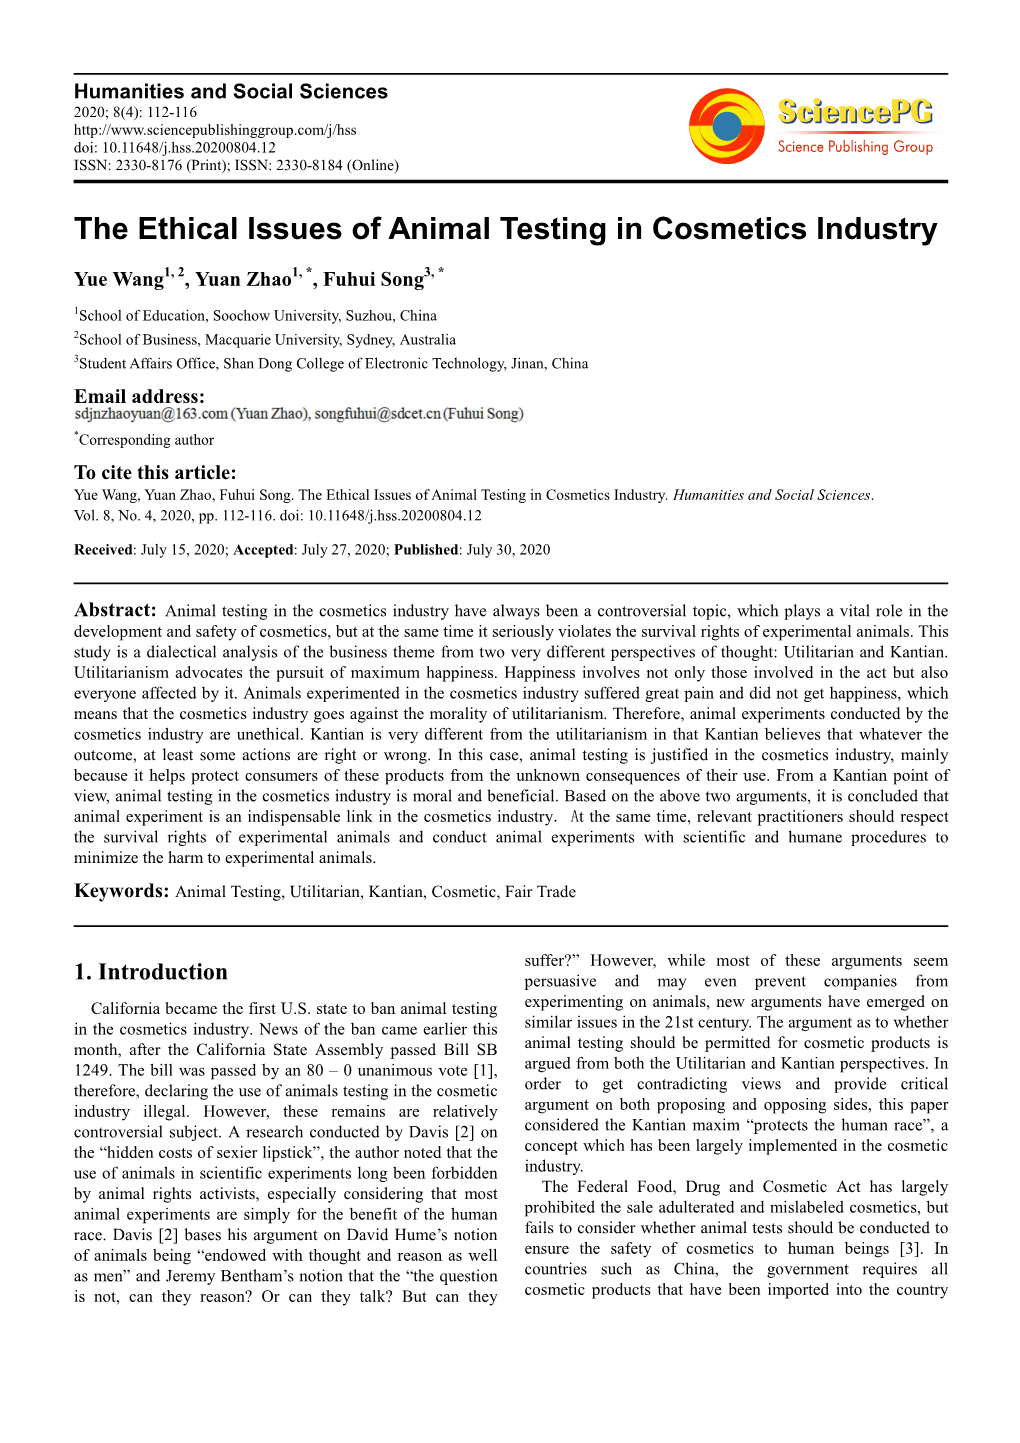 The Ethical Issues of Animal Testing in Cosmetics Industry